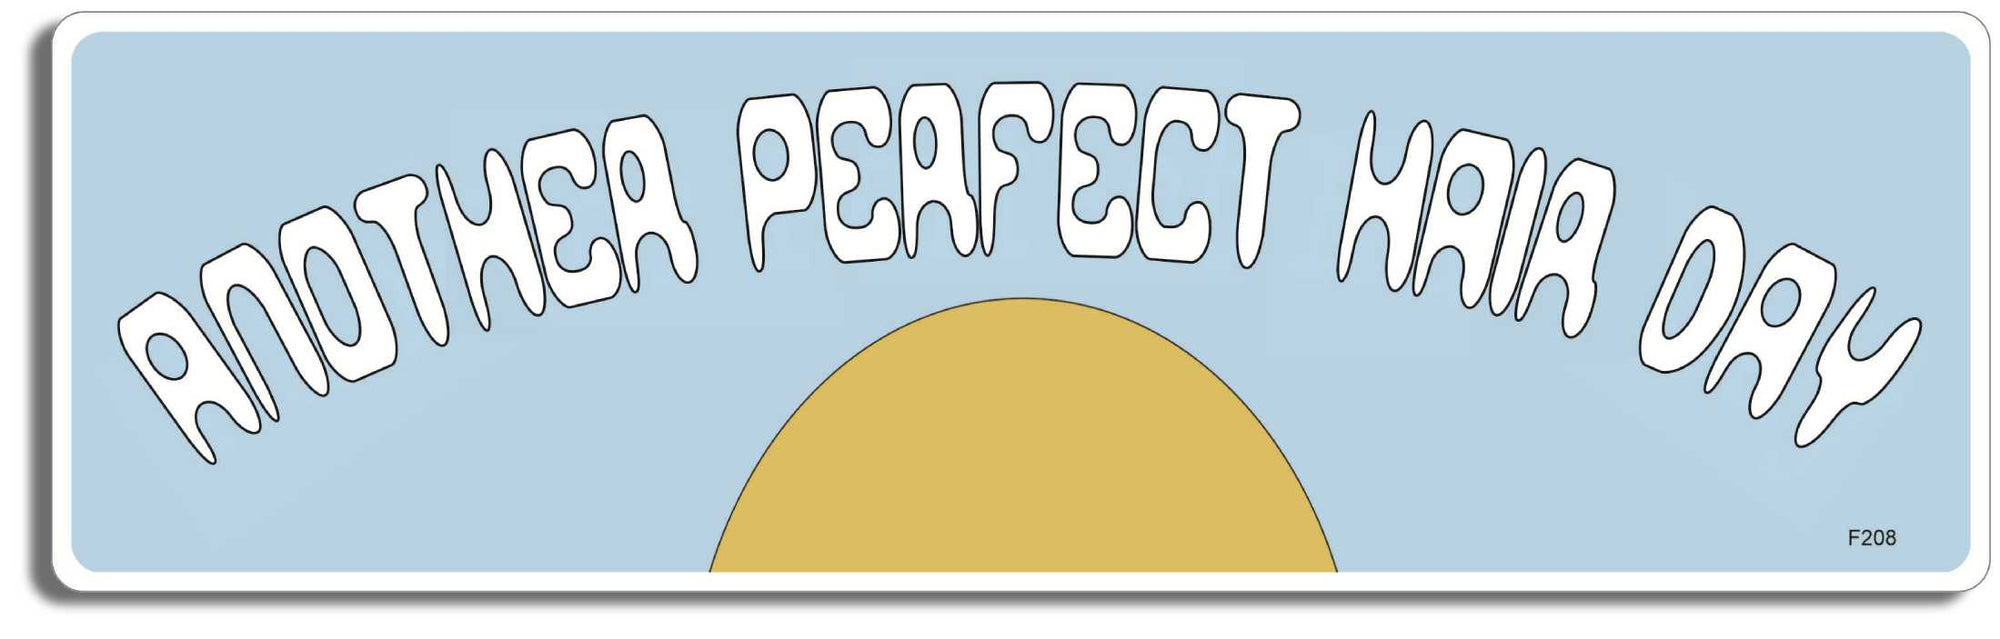 Another Perfect Hair Day  -  3" x 10" Bumper Sticker--Car Magnet- -  Decal Bumper Sticker-funny Bumper Sticker Car Magnet Another Perfect Hair Day-   Decal for cars funny, funny quote